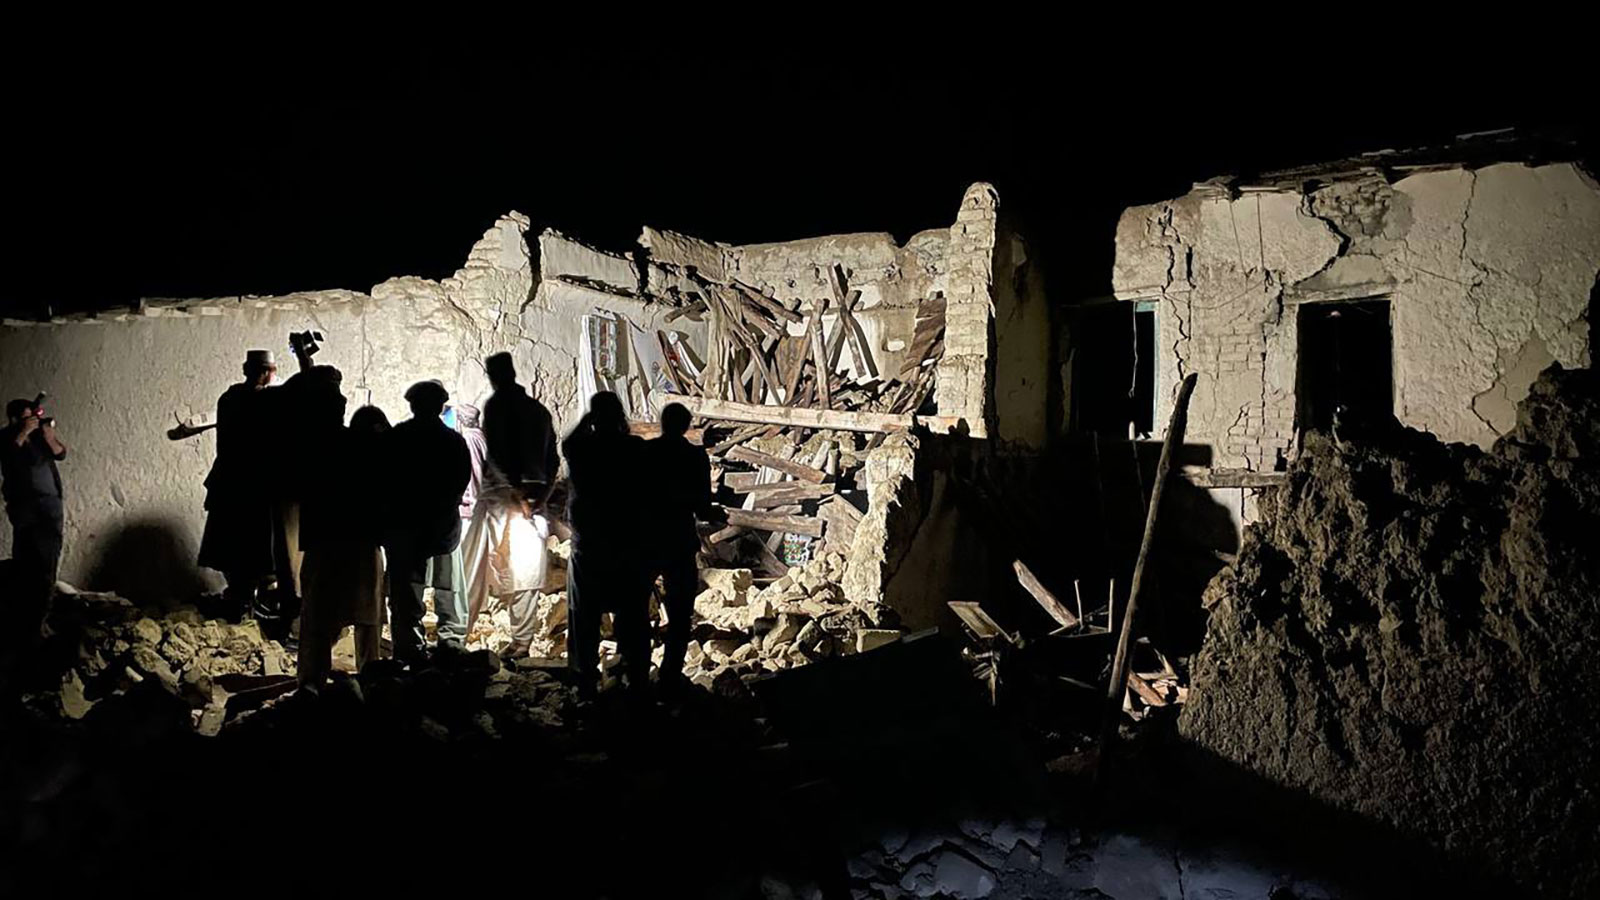 Search and rescue operations continue in Paktika province, Afghanistan, after an earthquake on June 22.